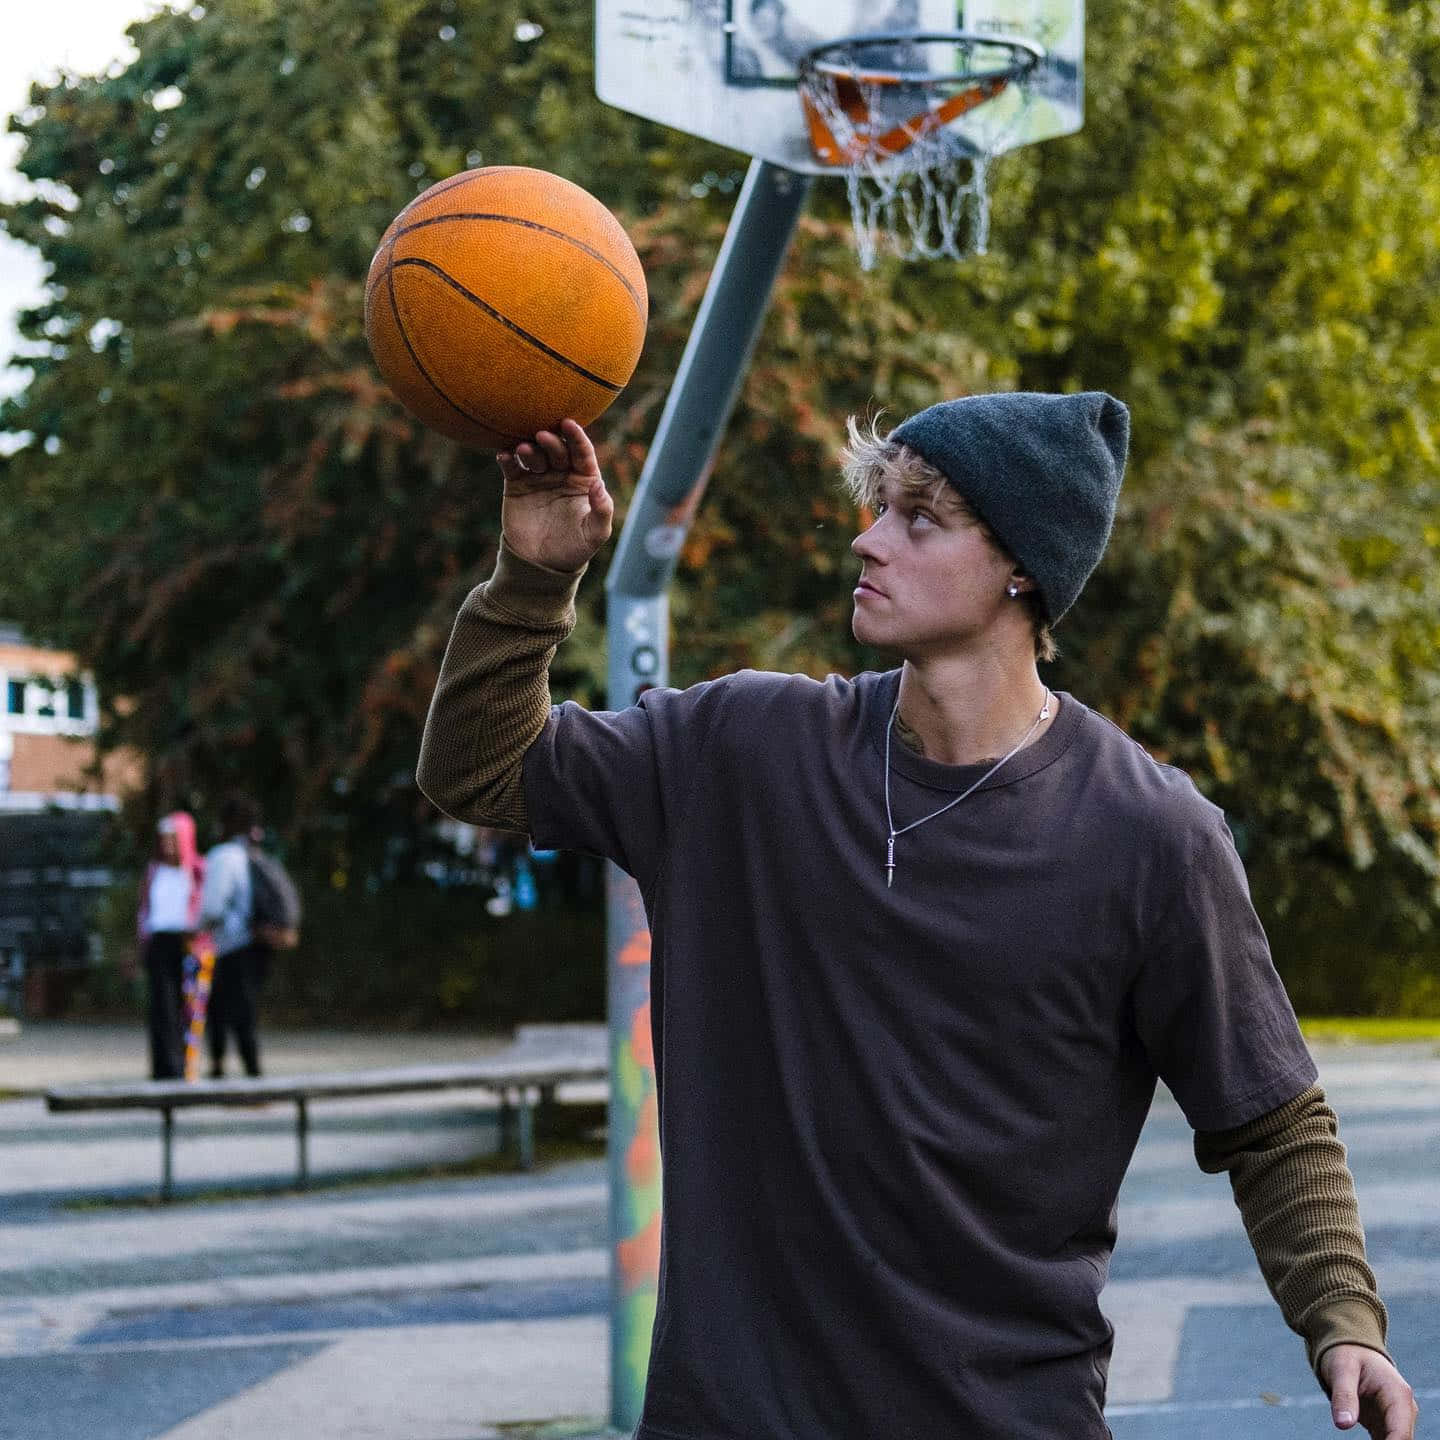 Casual Basketball Game Outdoors Wallpaper